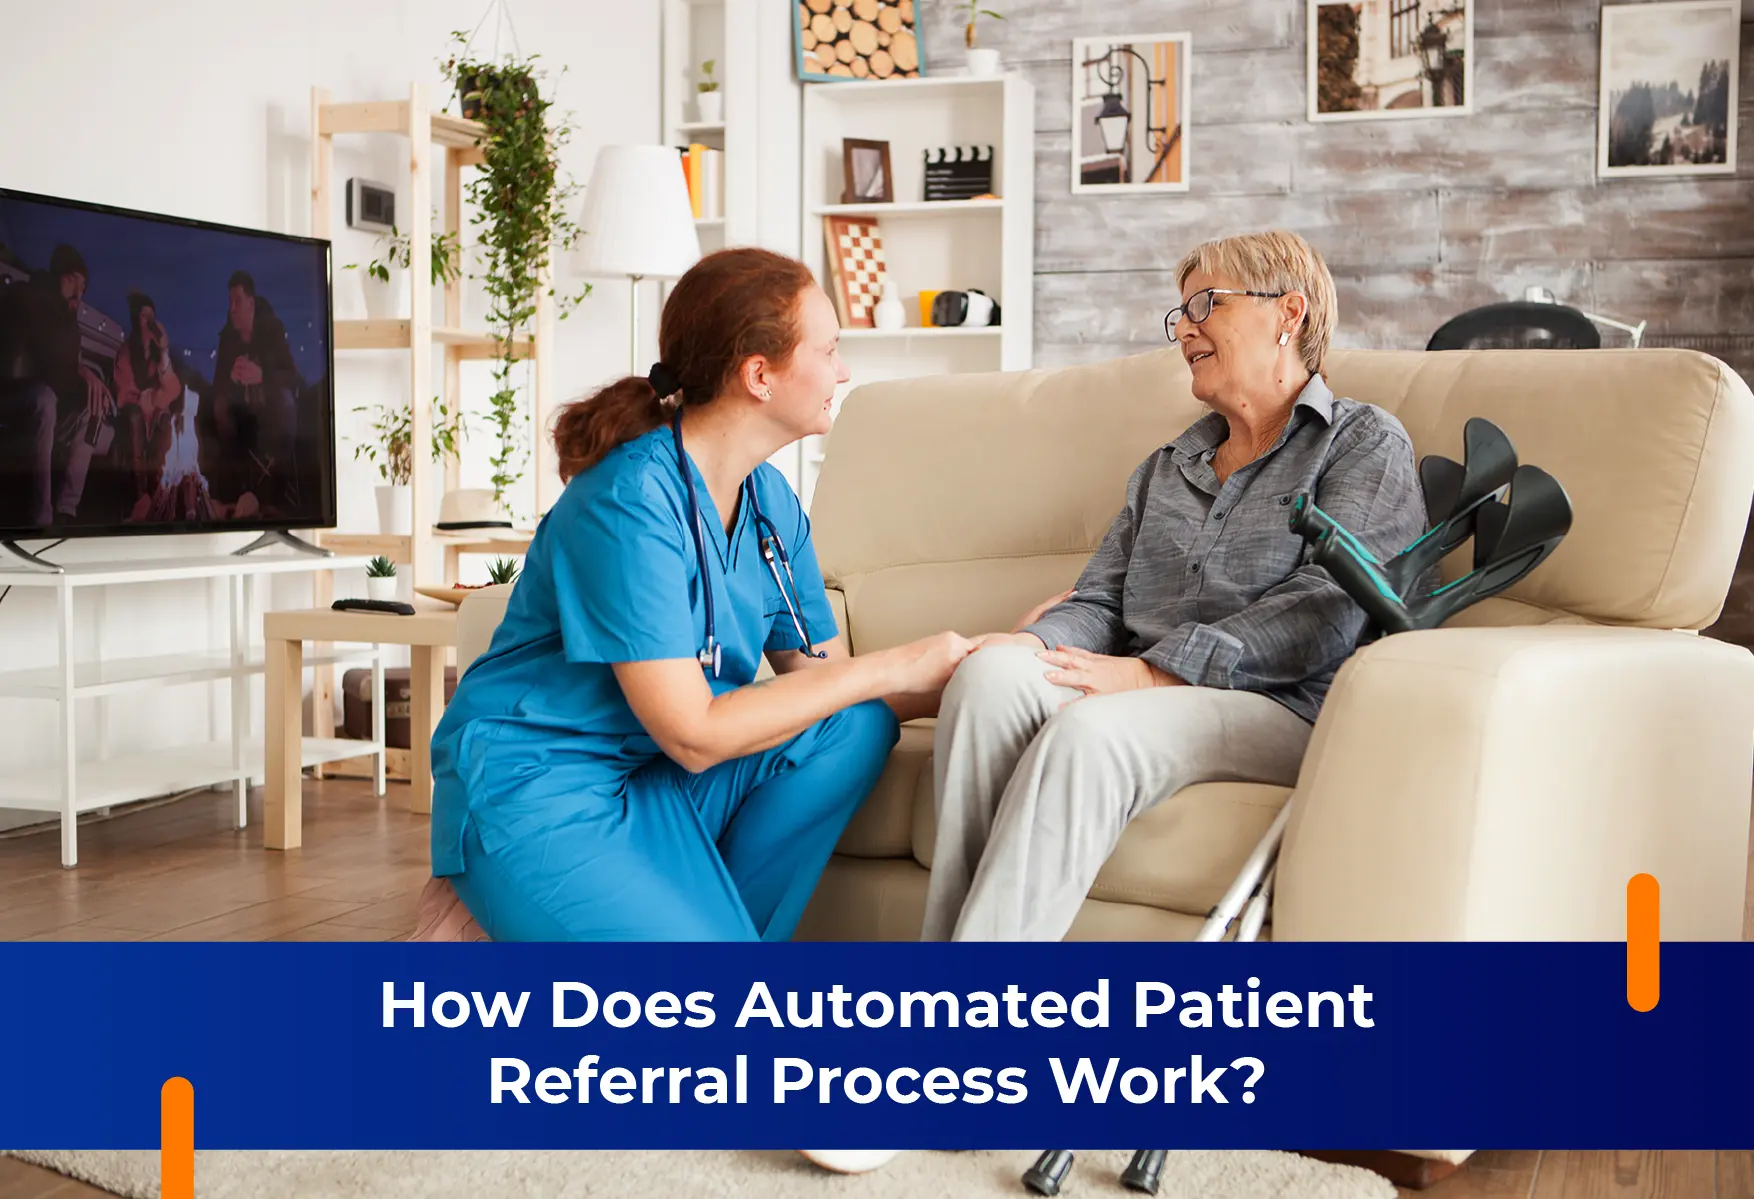 How Does Automated Patient Referral Process Work?